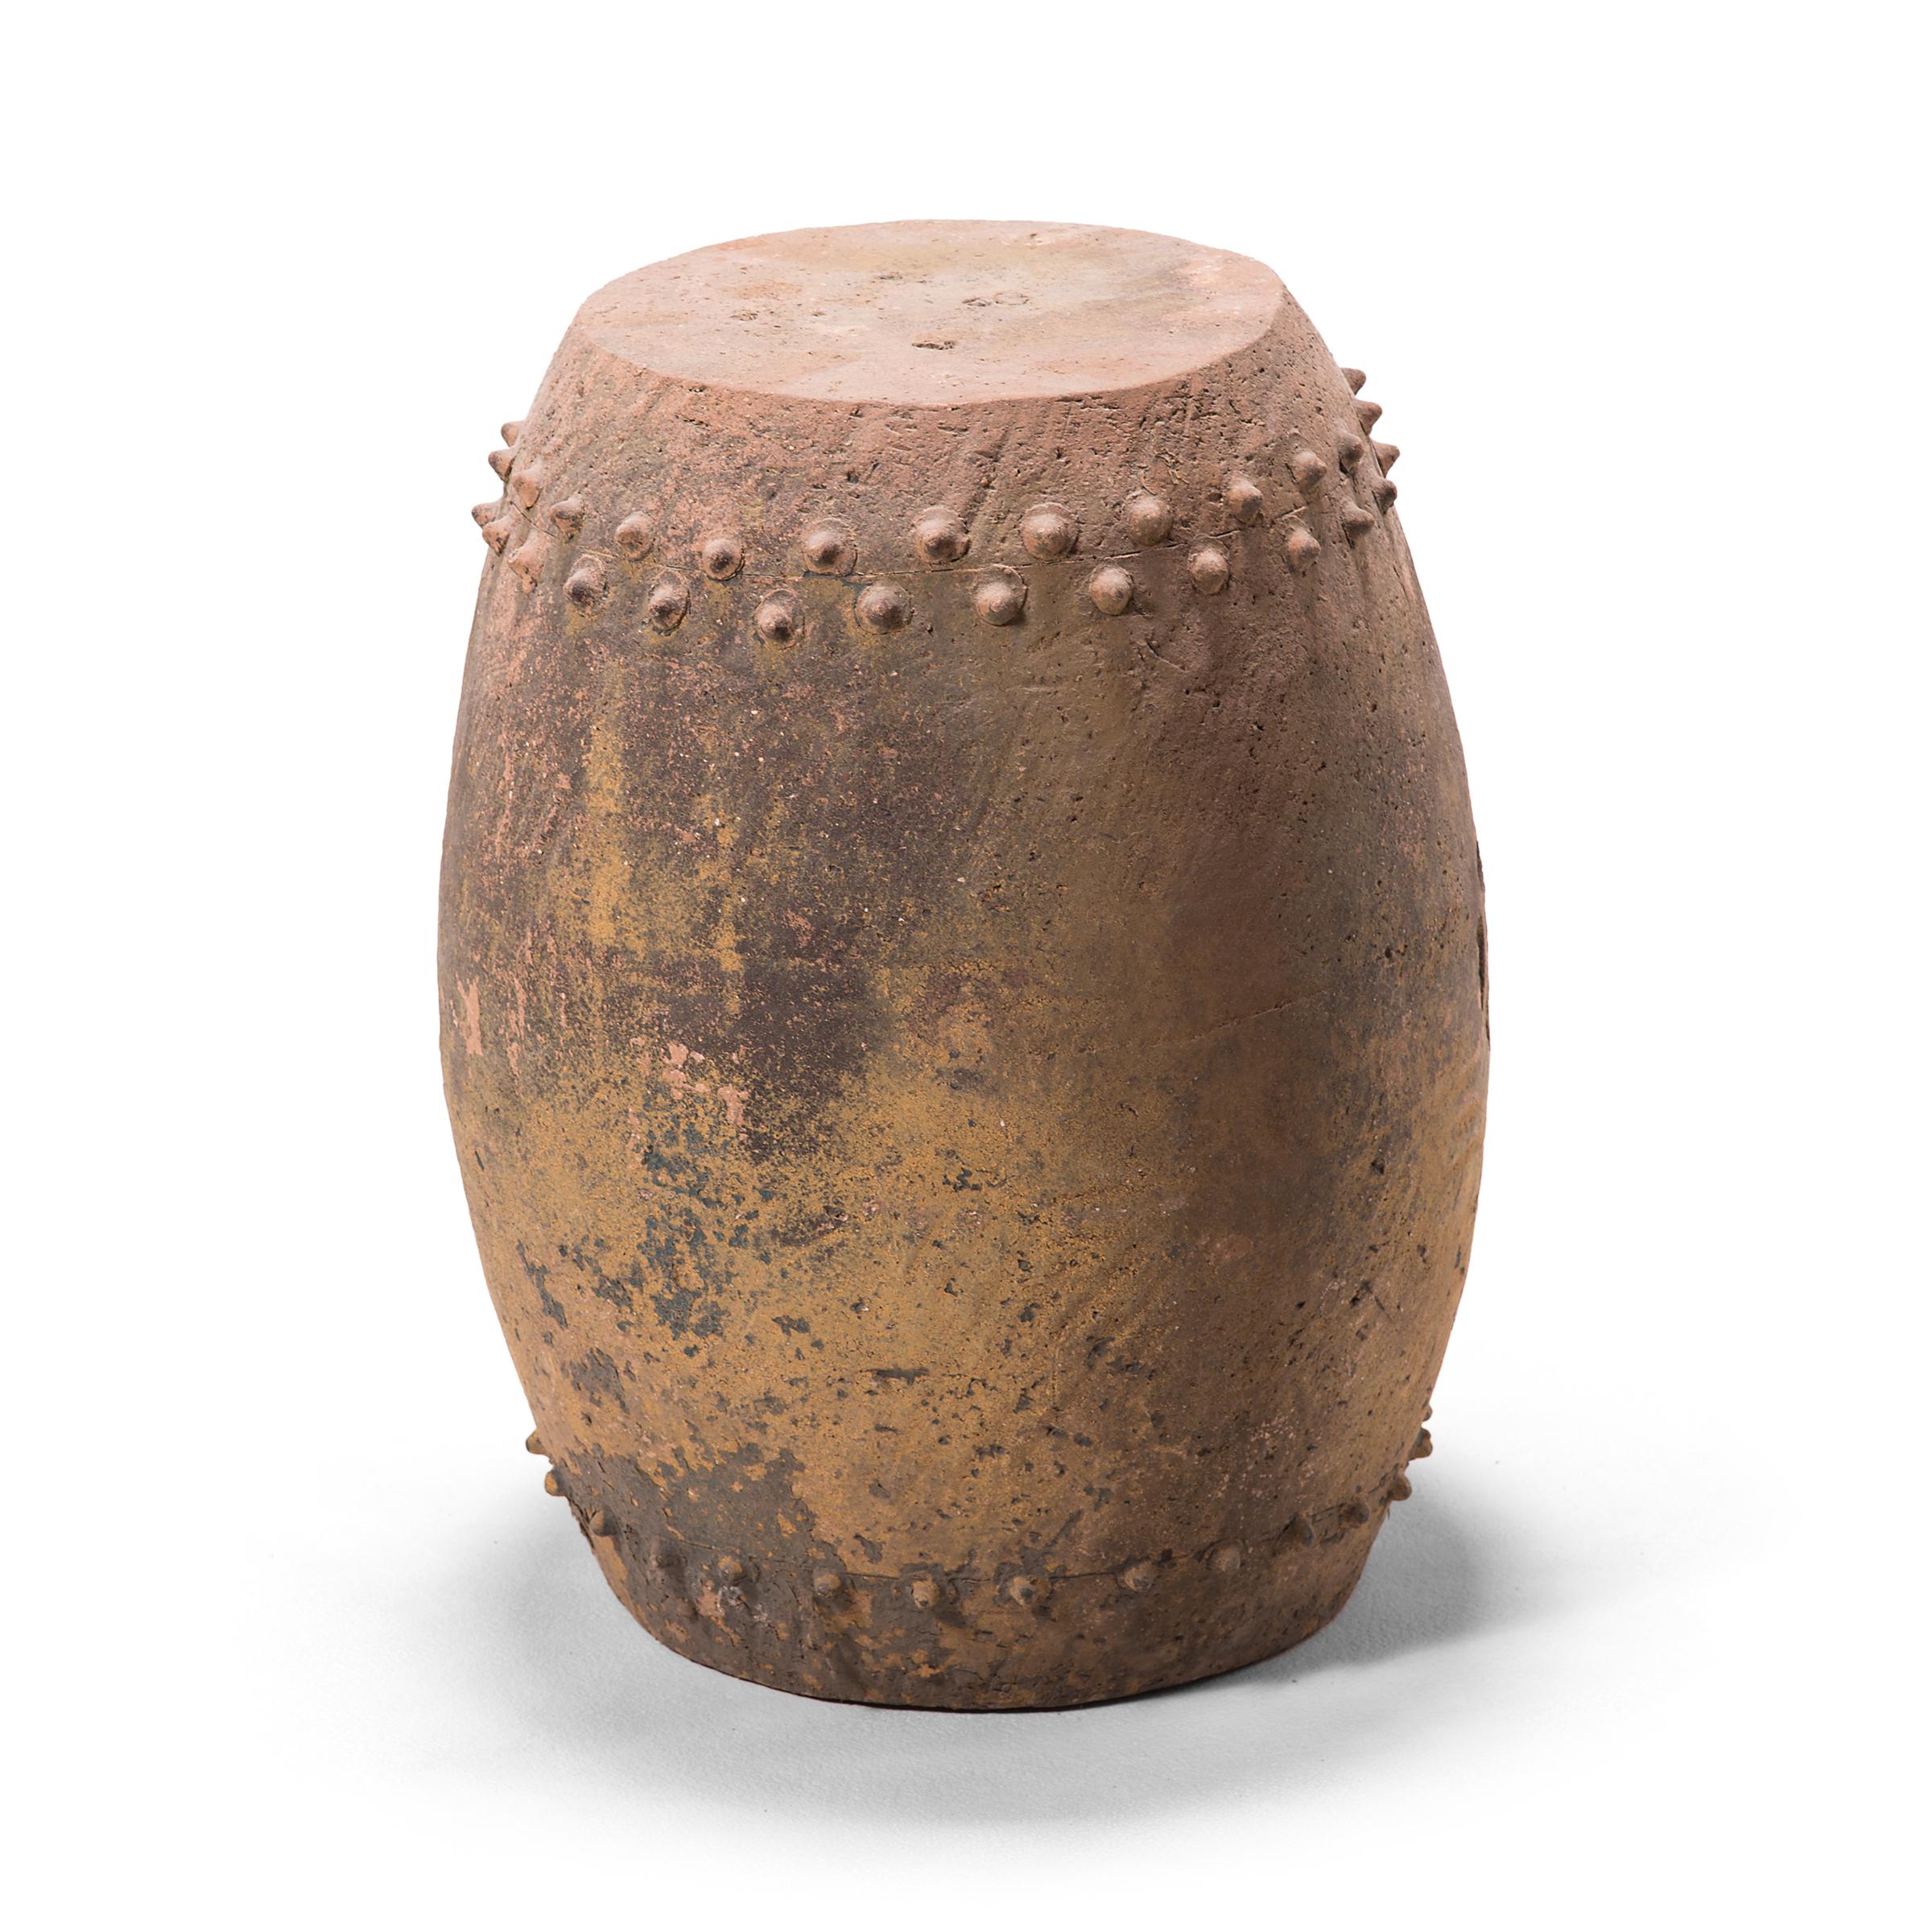 This early 20th-century terracotta garden stool was created in Pingyao, an ancient, respected city in China's Shanxi province. With a history dating as far back as c. 800 B.C., Pingyao is widely known for its well-preserved Ming- and Qing-dynasty